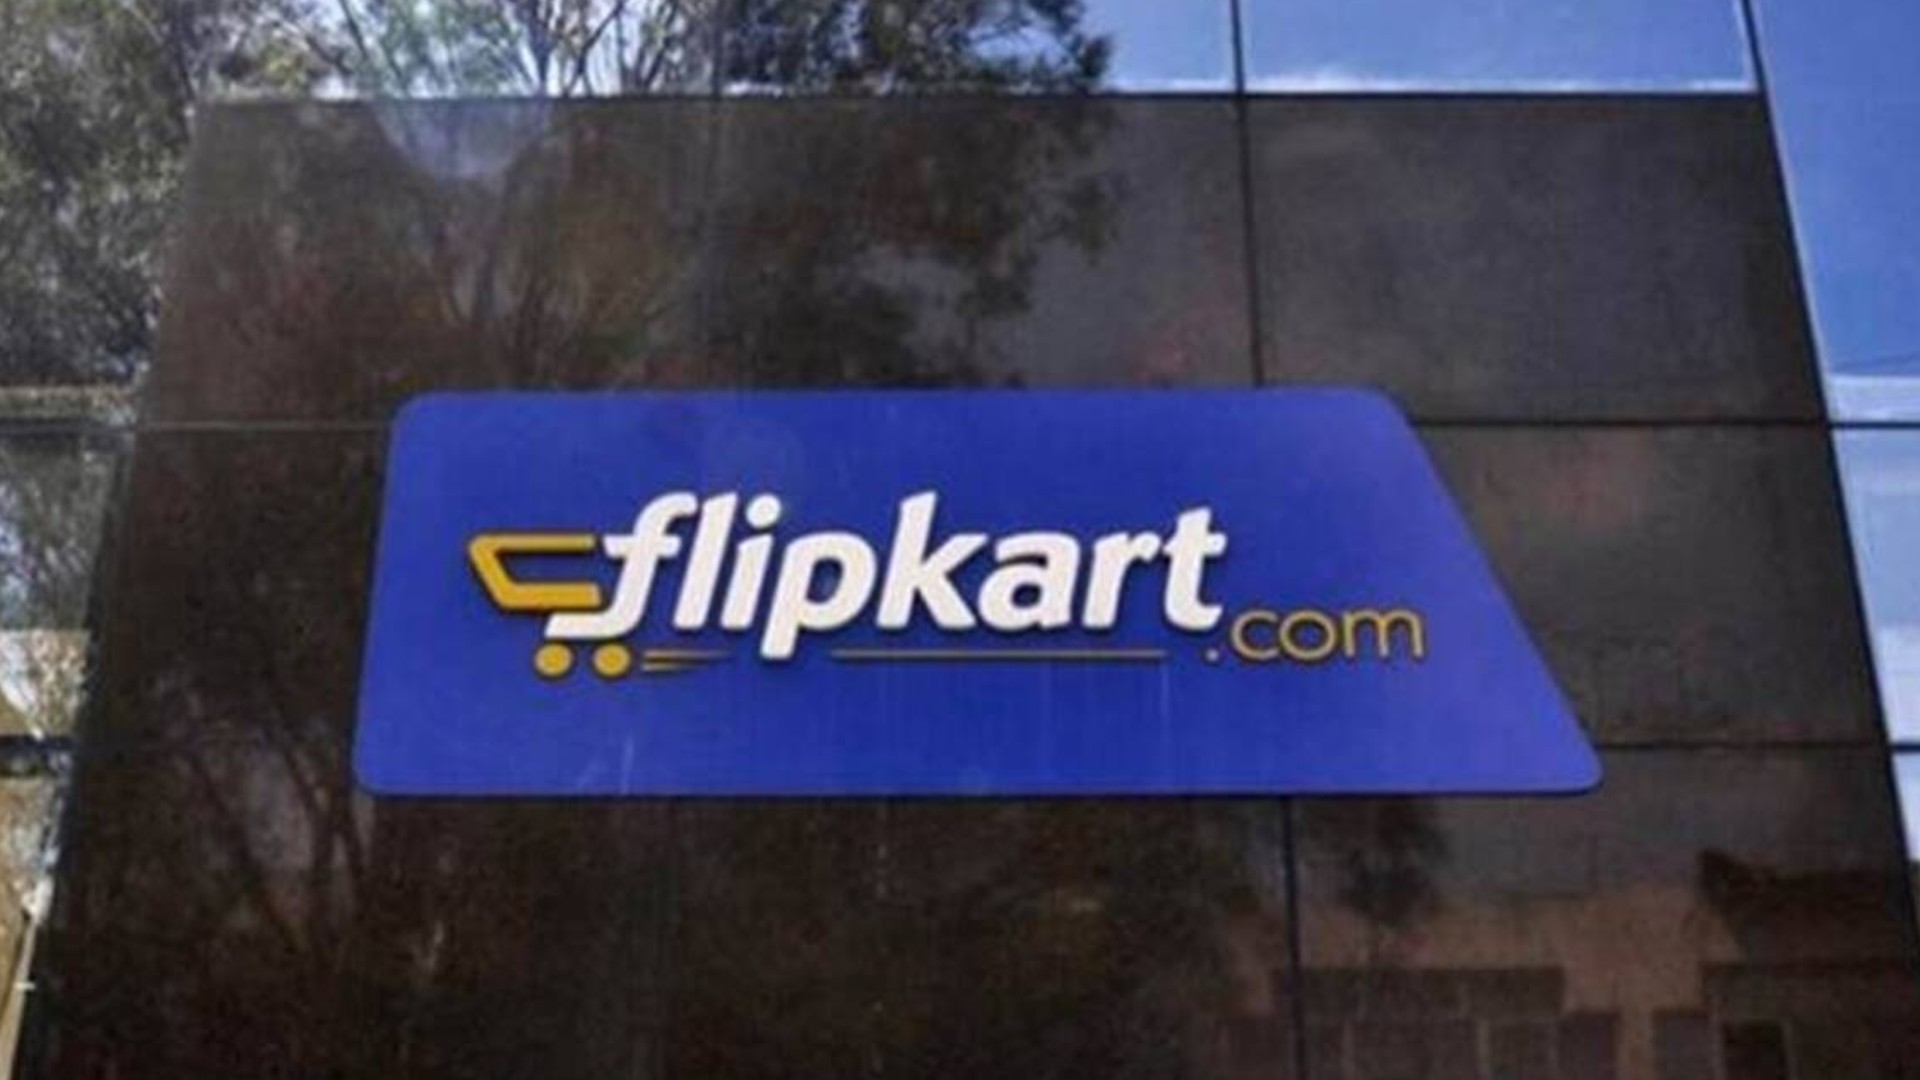 Flipkart To Acquire Cleartrip As Travel Company Faced Huge Economic Losses Amid Lockdown